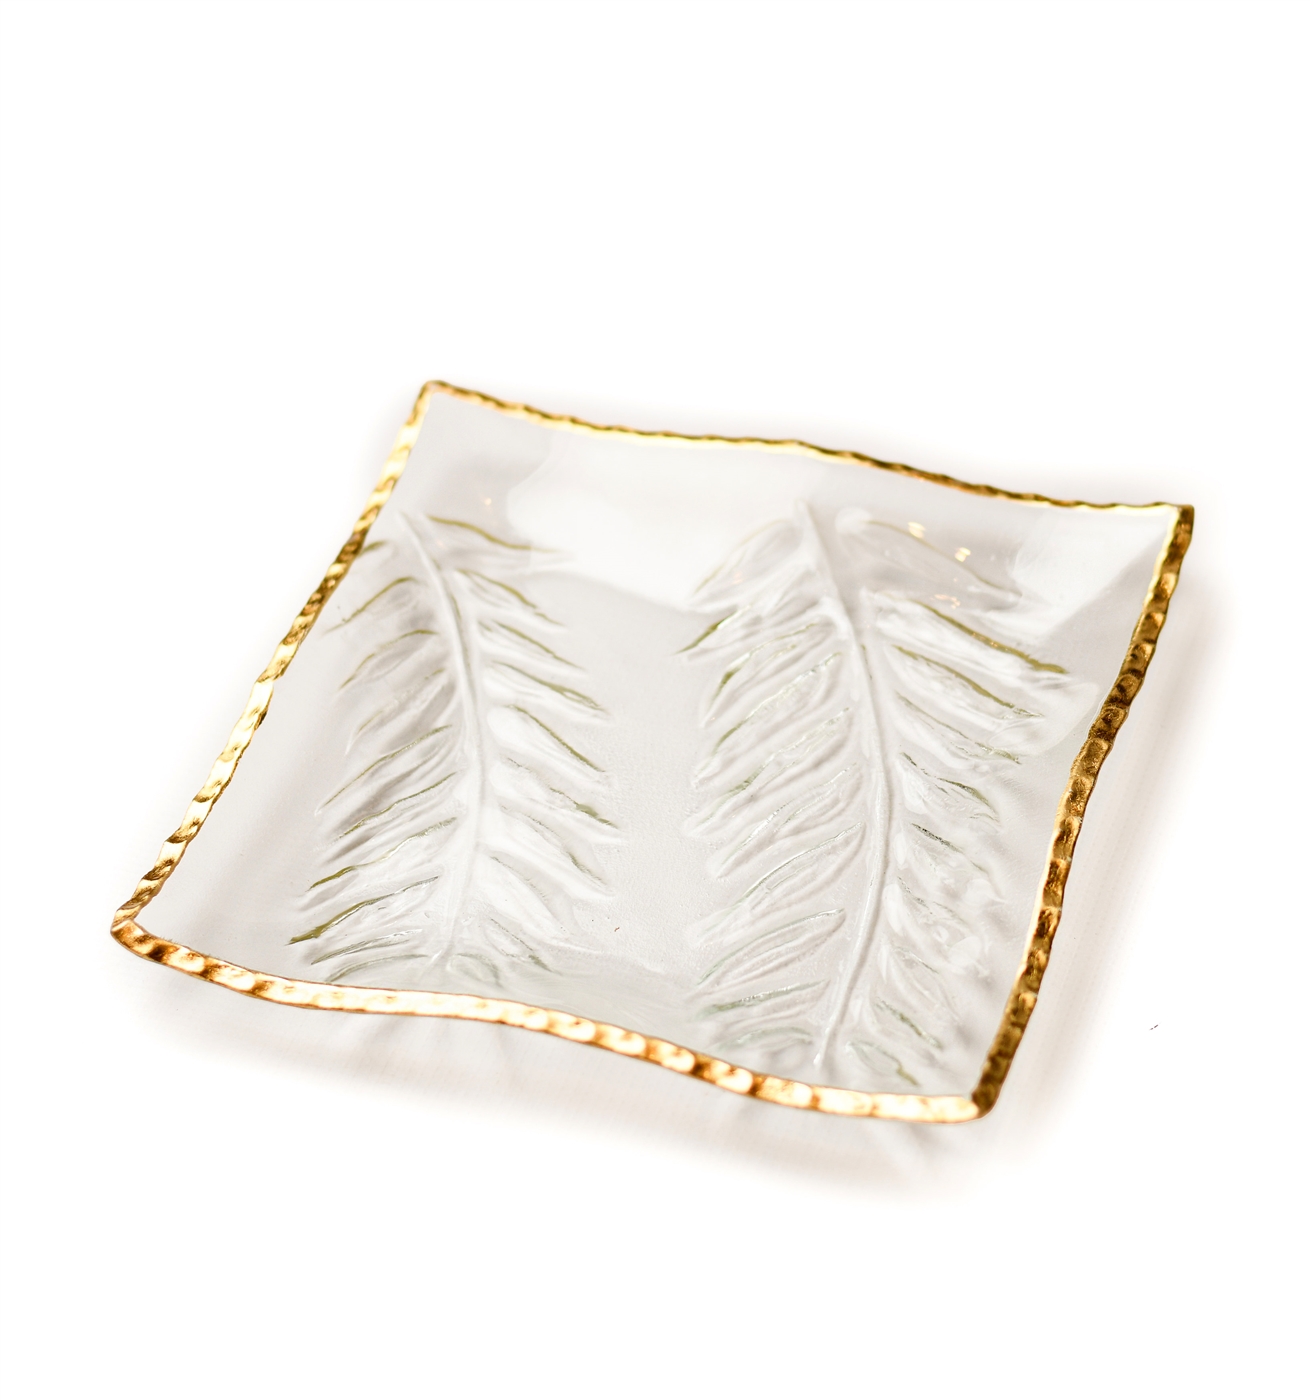 Clear Square Glass Tray with Gold Rim- Embossed Leaf Design